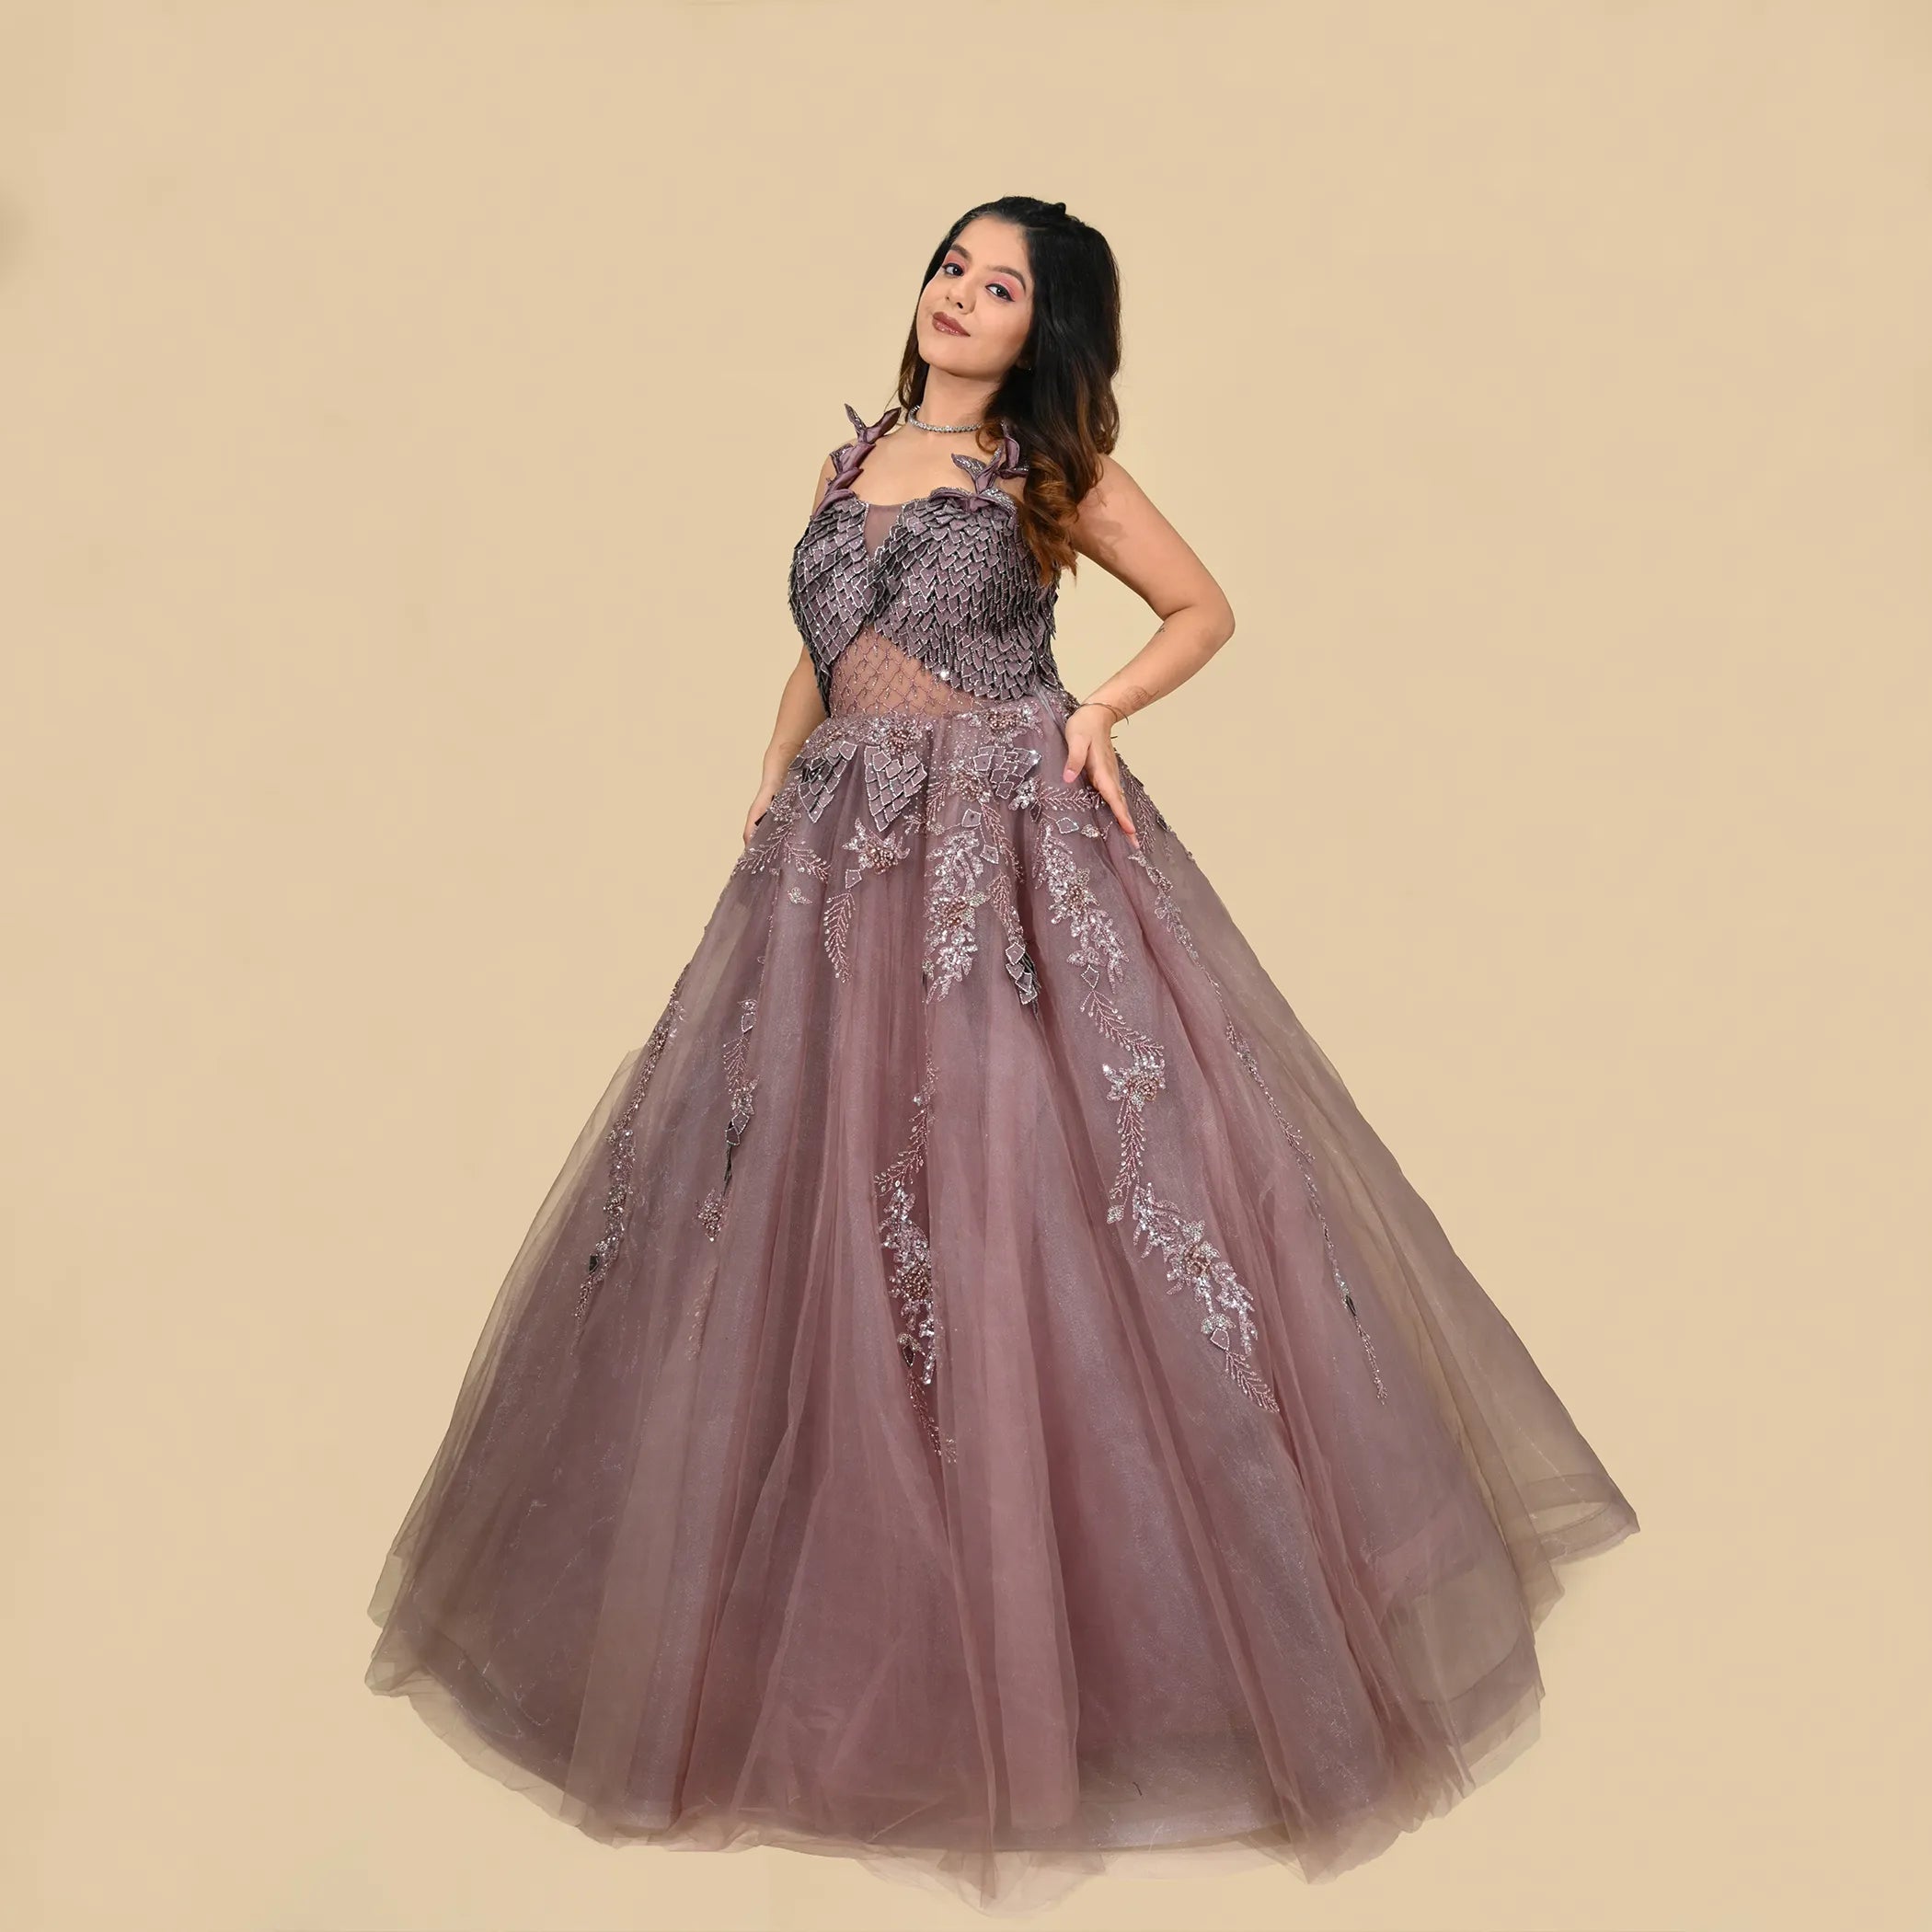 Aso Ebi Prom Dress: High Split, Sexy & Elegant Evening Gown For Special  Occasions NL144 From Nuoweiman, $143.22 | DHgate.Com